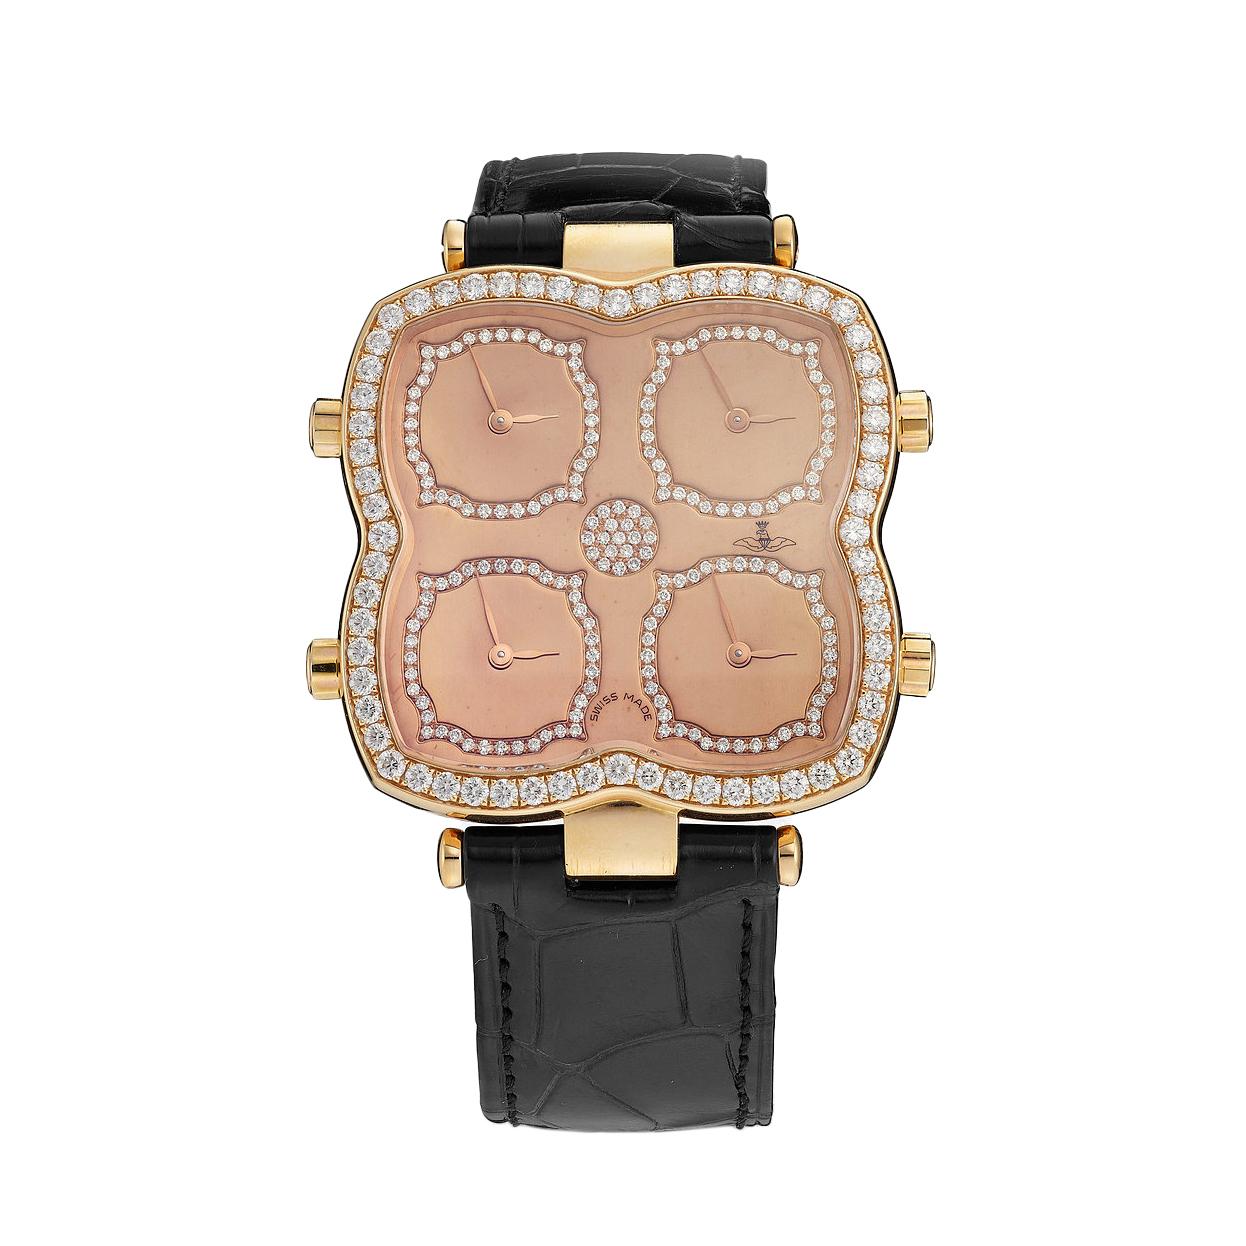 Watch in pink gold 18kt set with 253 diamonds 2.97 cts on bezel and dial with 4 time zones, prong buckle alligator strap quartz movement. We do not guarantee the functioning of this watch.